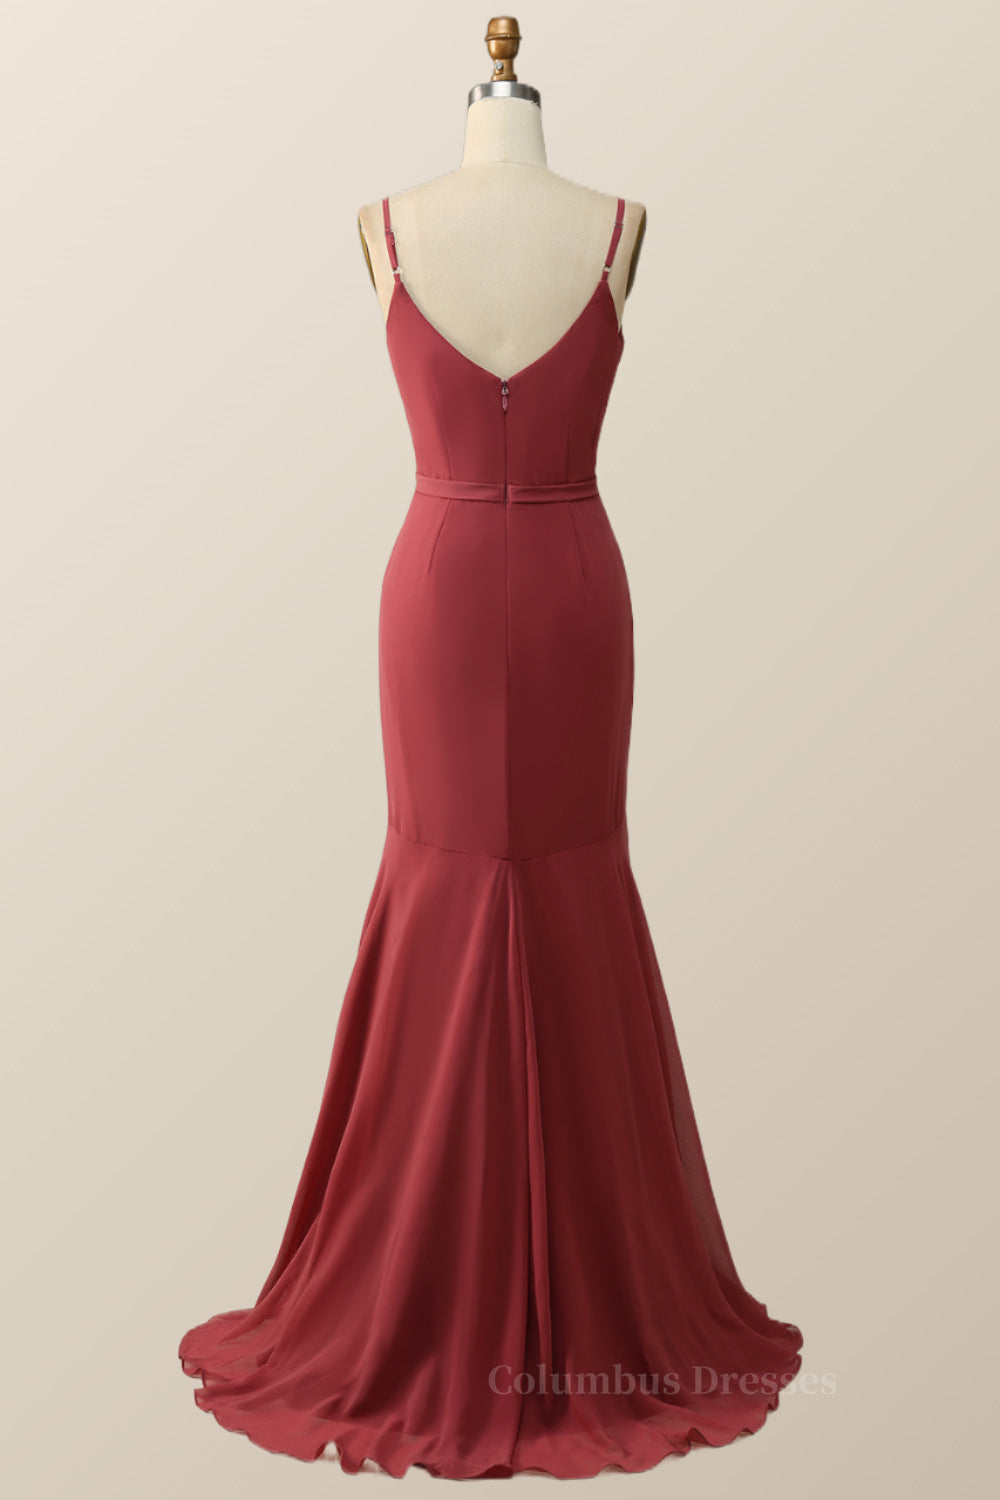 Formal Dress With Embroidered Flowers, Terracotta Cowl Neck Meramaid Long Bridesmaid Dress